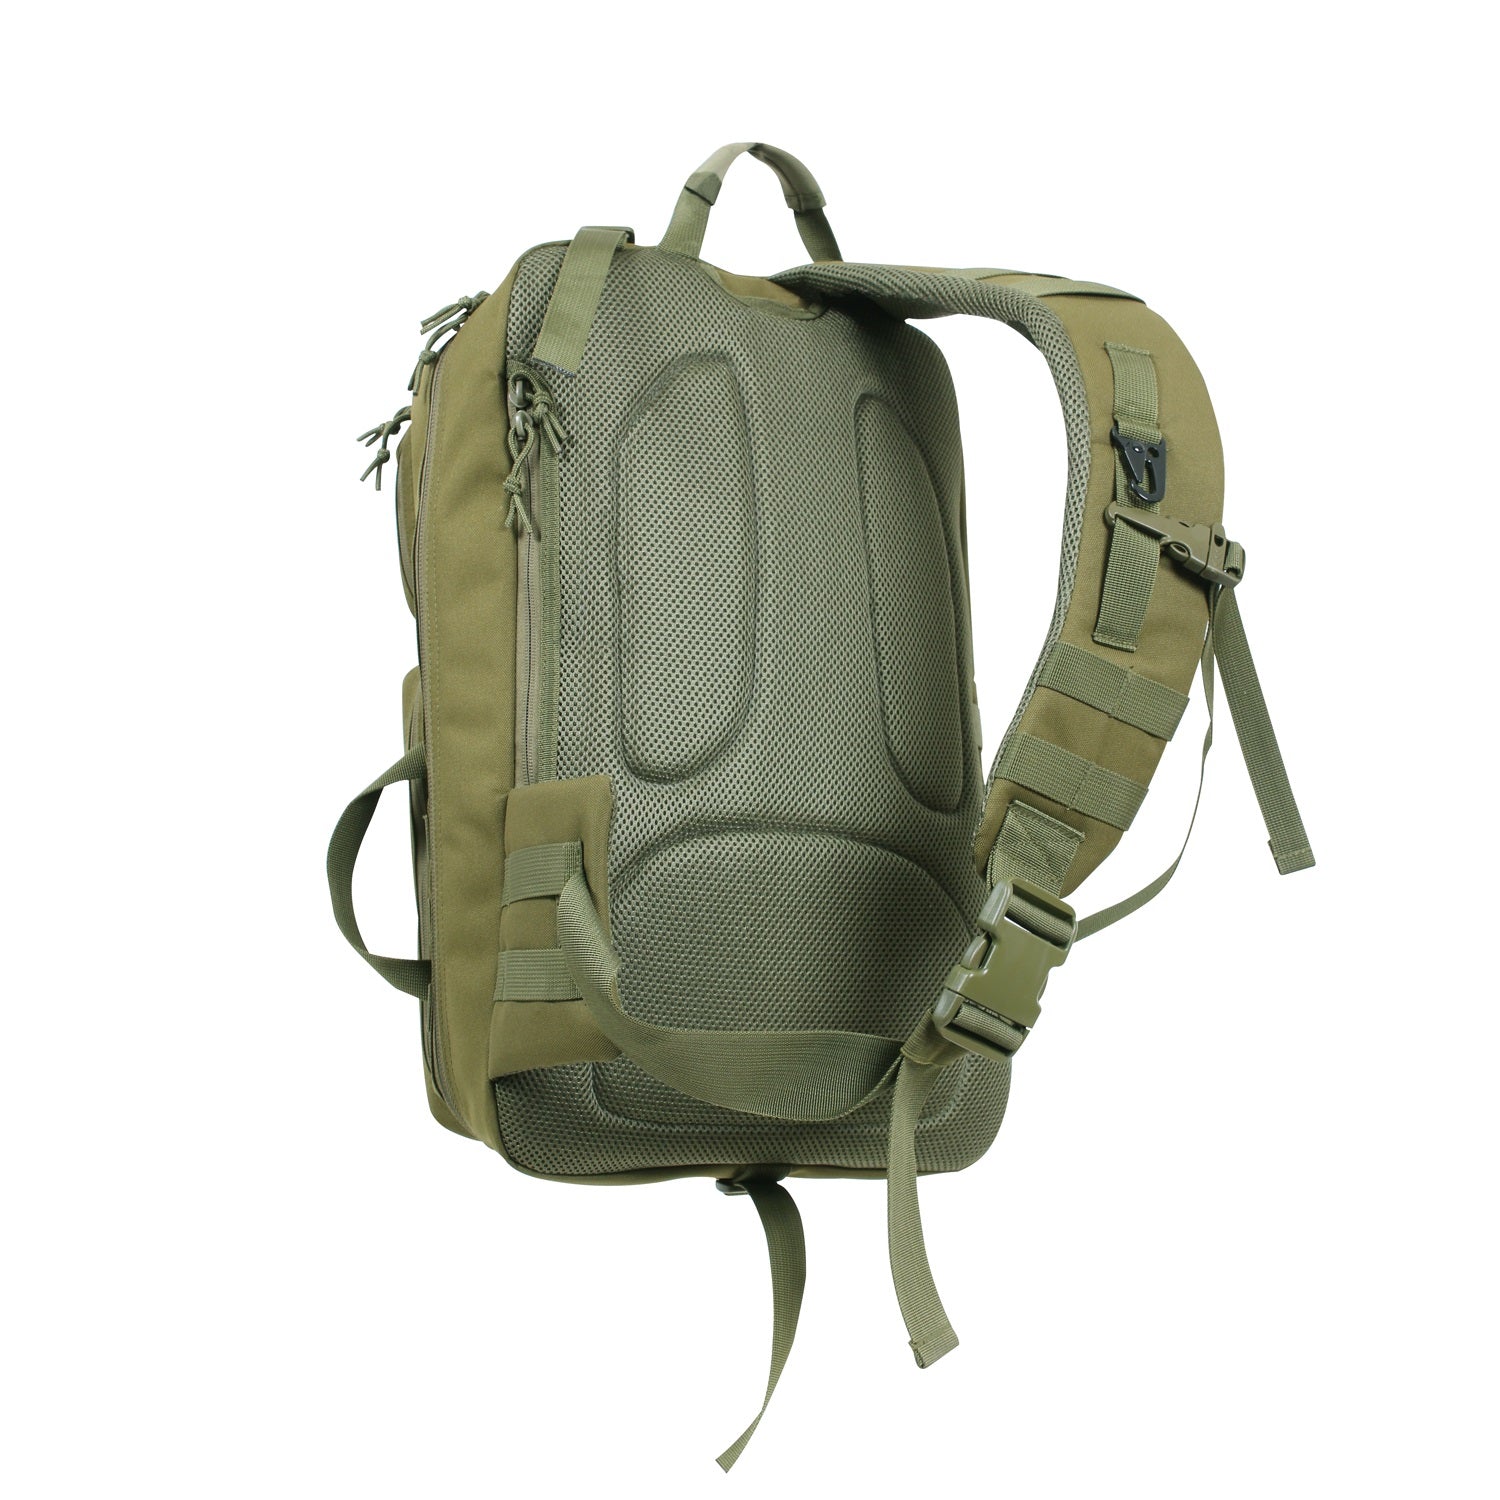 Rothco Tactisling Transport Pack Olive Drab